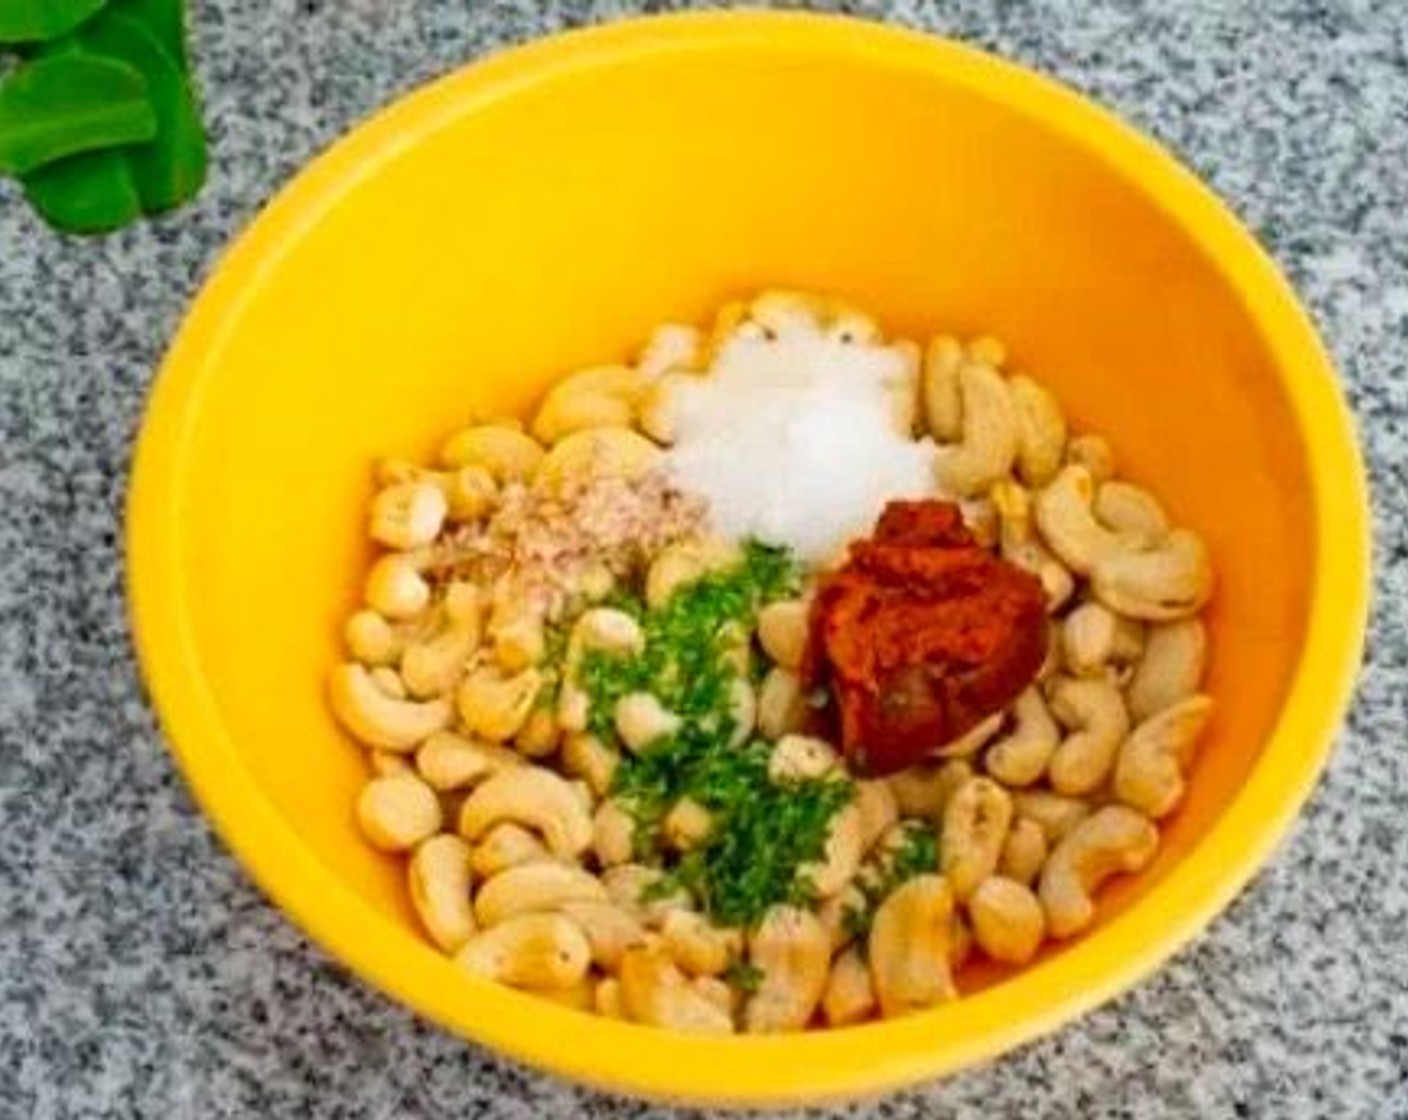 step 2 In a bowl, combine Raw Cashews (1 3/4 cups), Tom Yum Chili Paste (1 Tbsp), Coconut Oil (1 Tbsp), juice from Lime (1/2), Granulated Sugar (1/2 Tbsp), Fresh Cilantro (1 tsp), and the white portion of the Lemongrass (1 stalk). Stir well until all of the cashew nuts are coated.